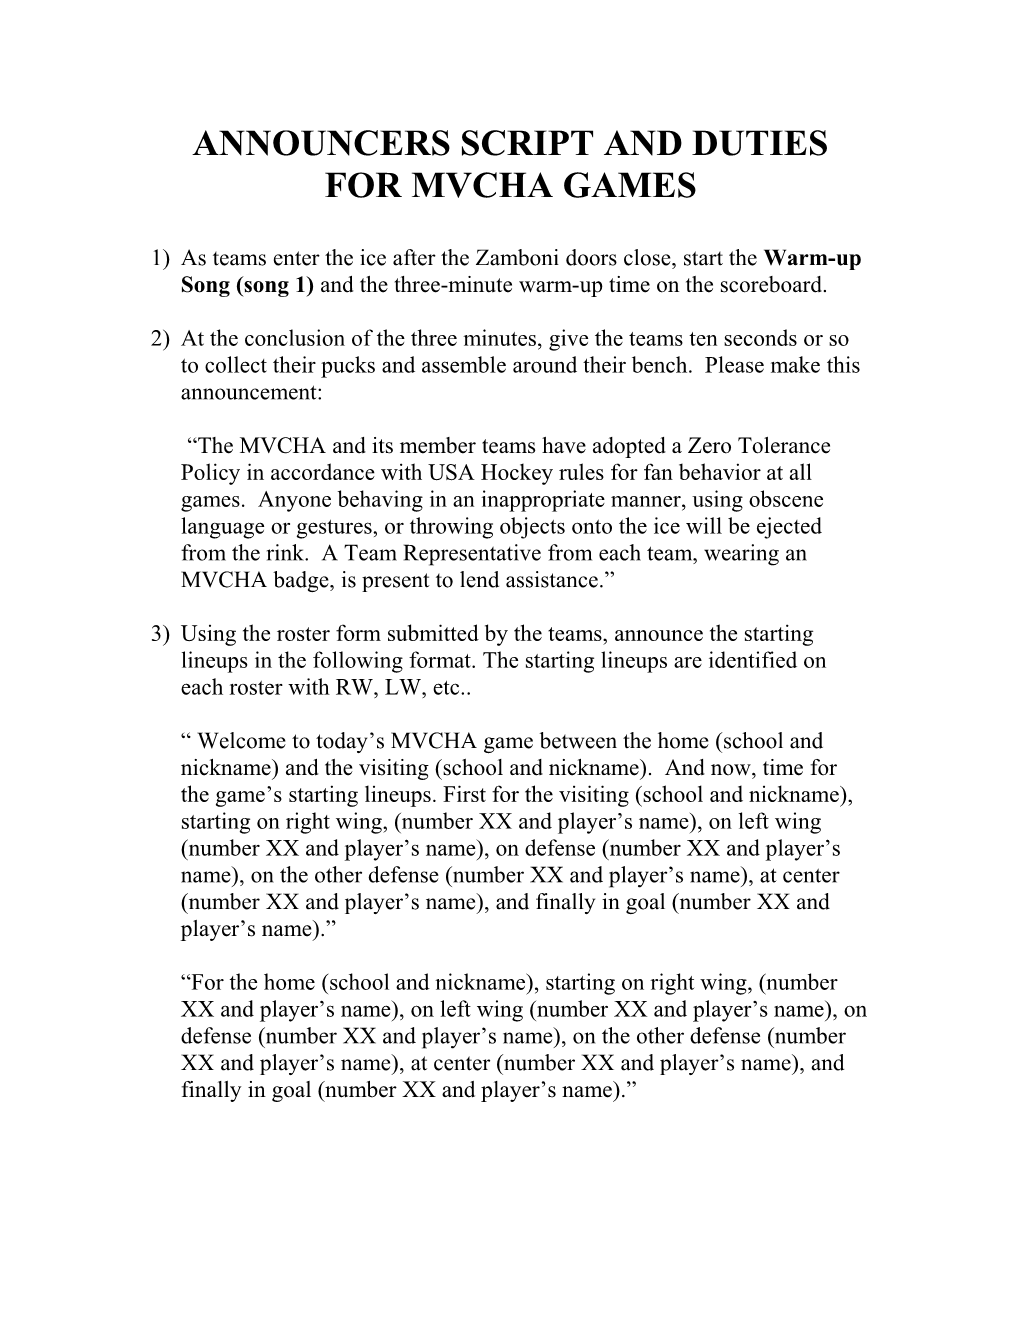 Announcers Script and Duties for Mvcha Games